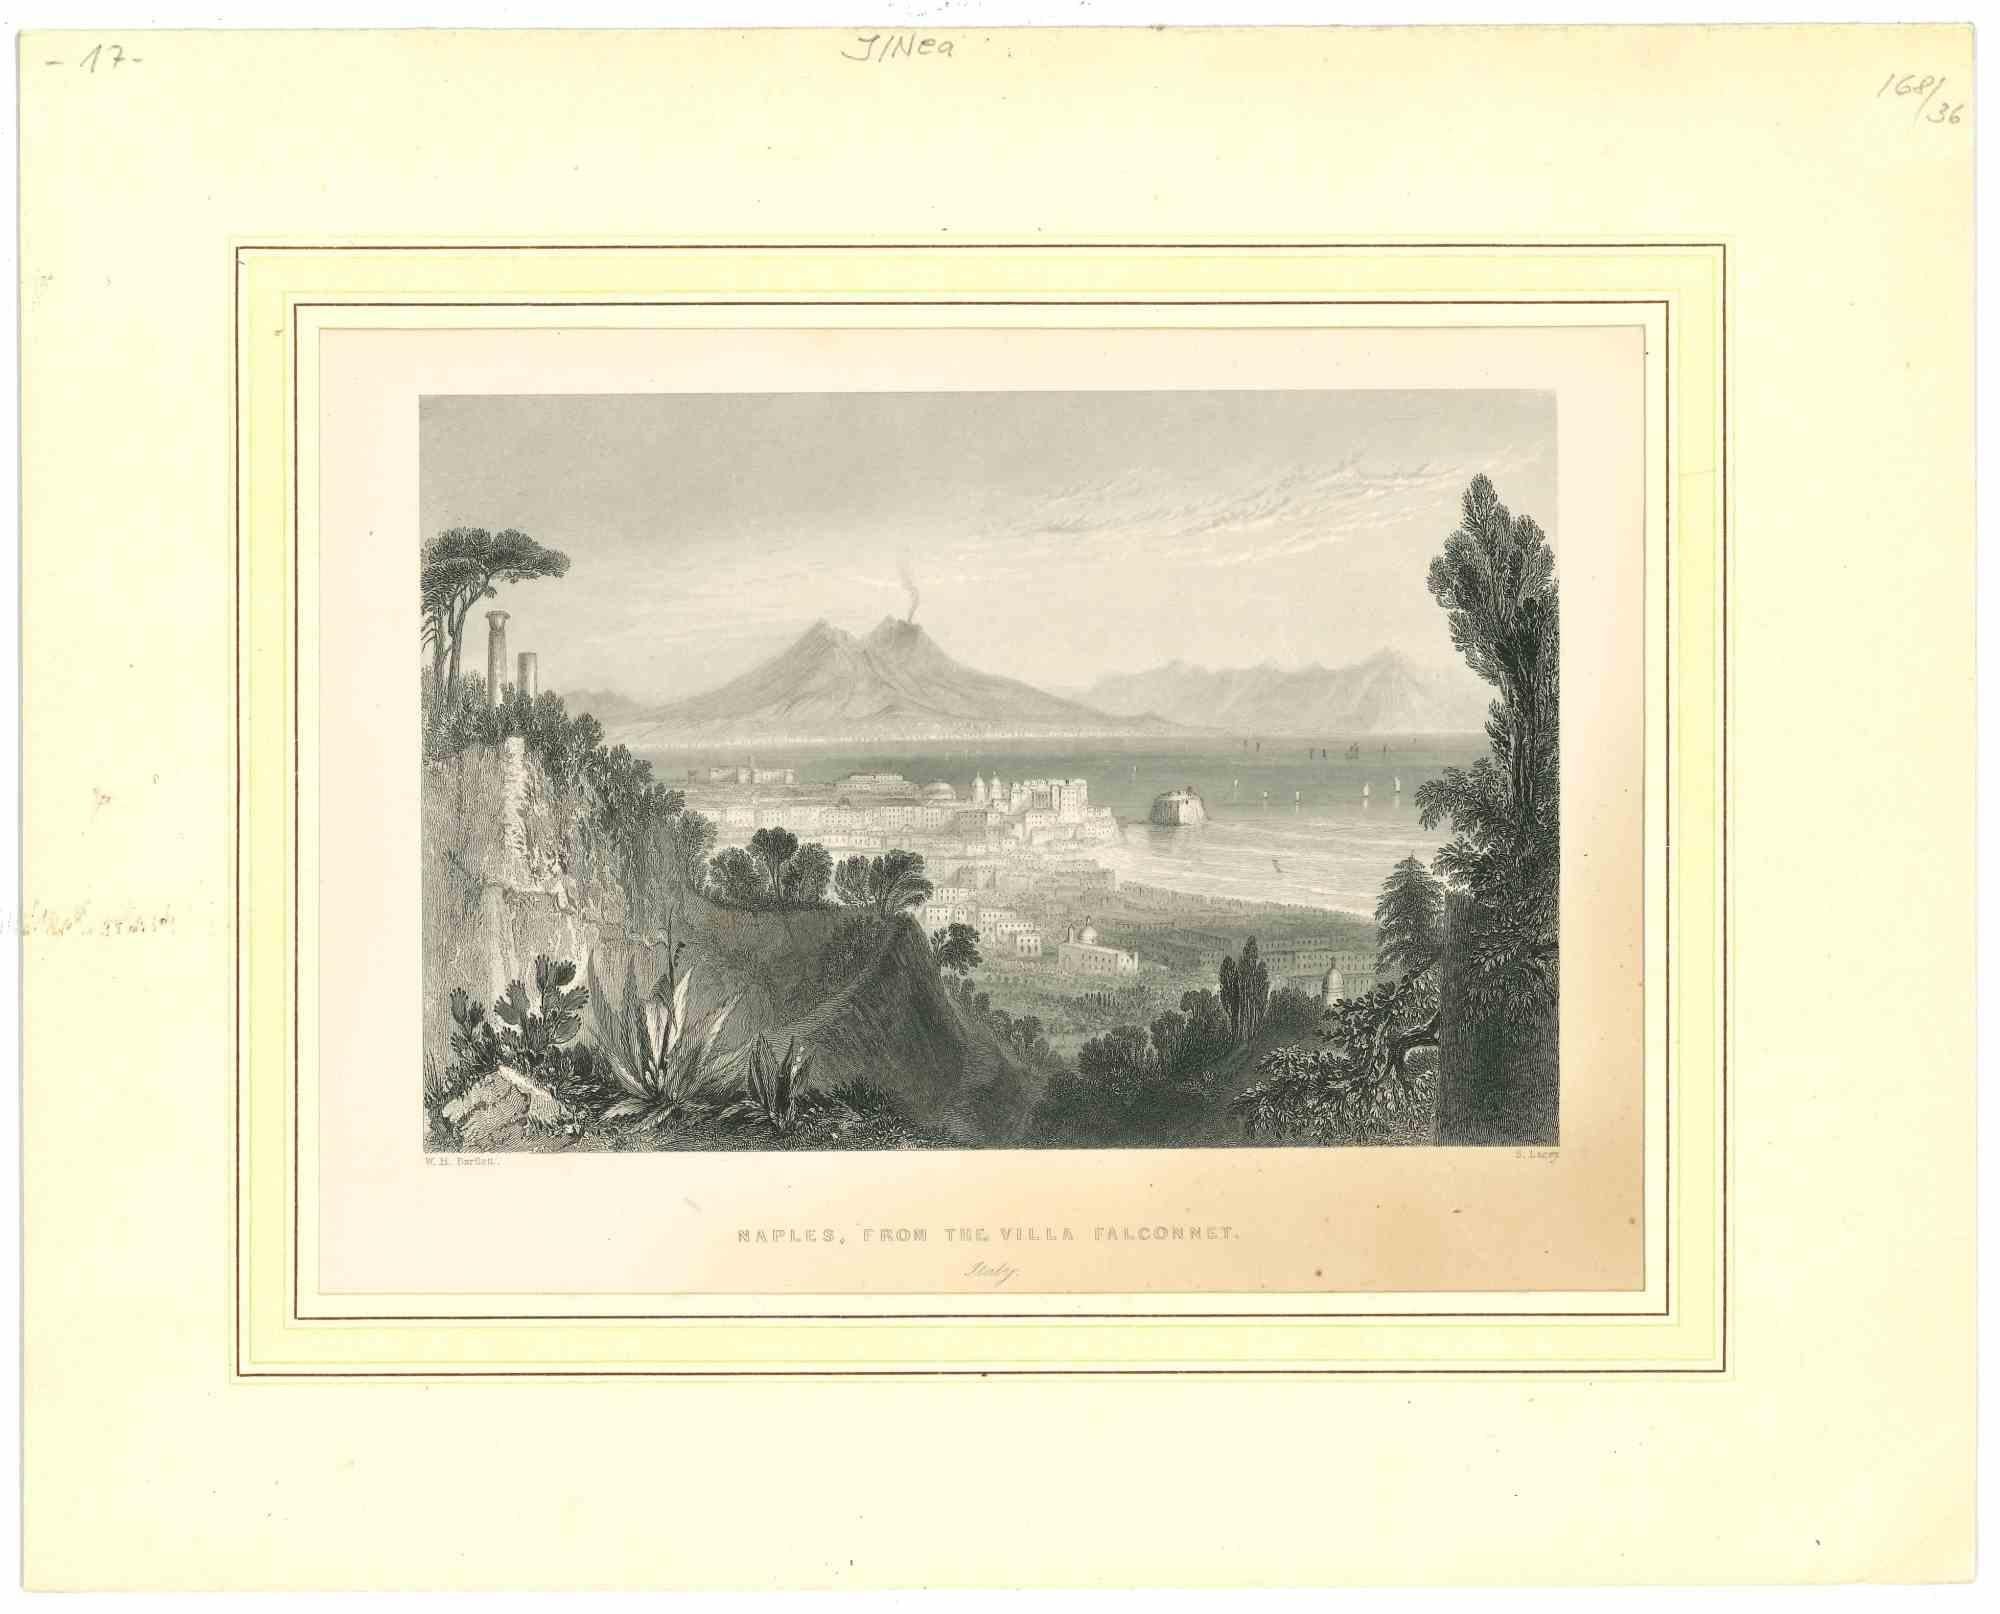 Unknown Landscape Print - Naples, from the villa Falconnet - Original Lithograph - Early 19th century